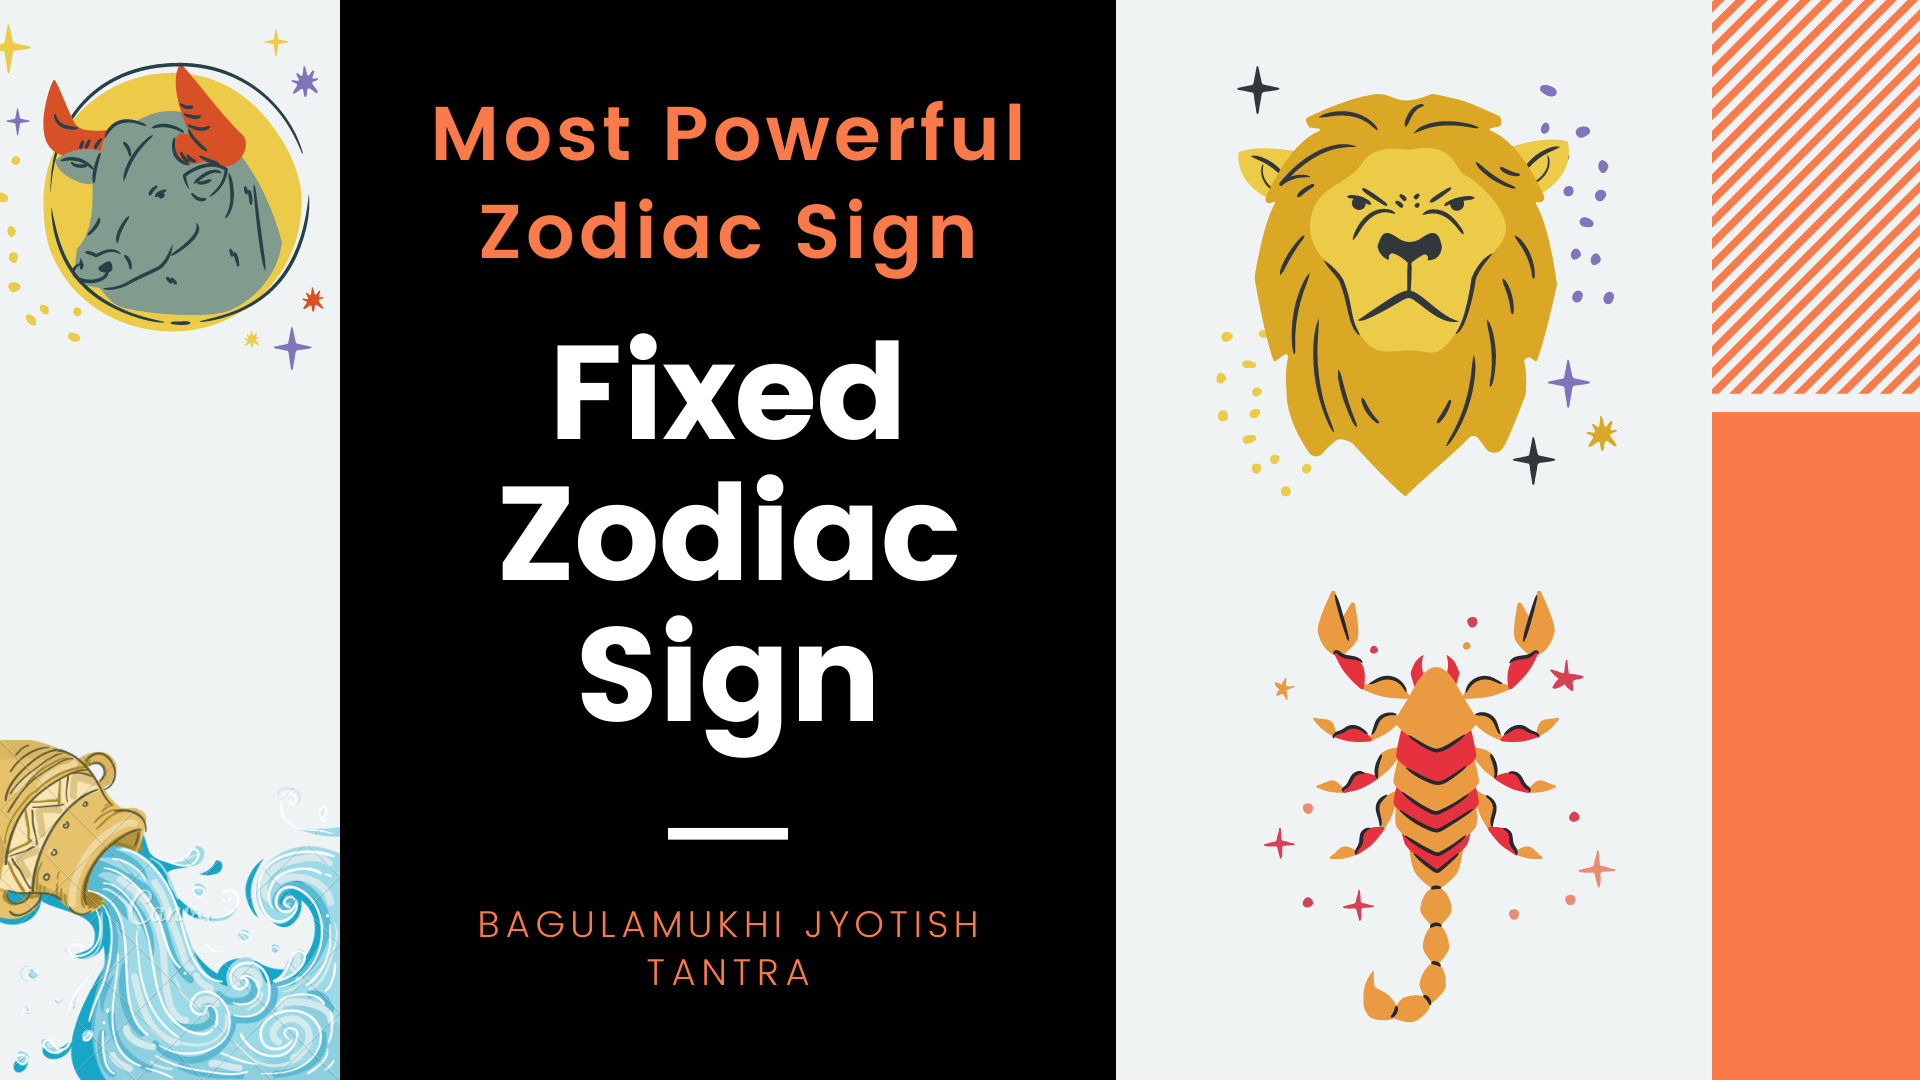 Sign what in the strongest zodiac is the Which Zodiac